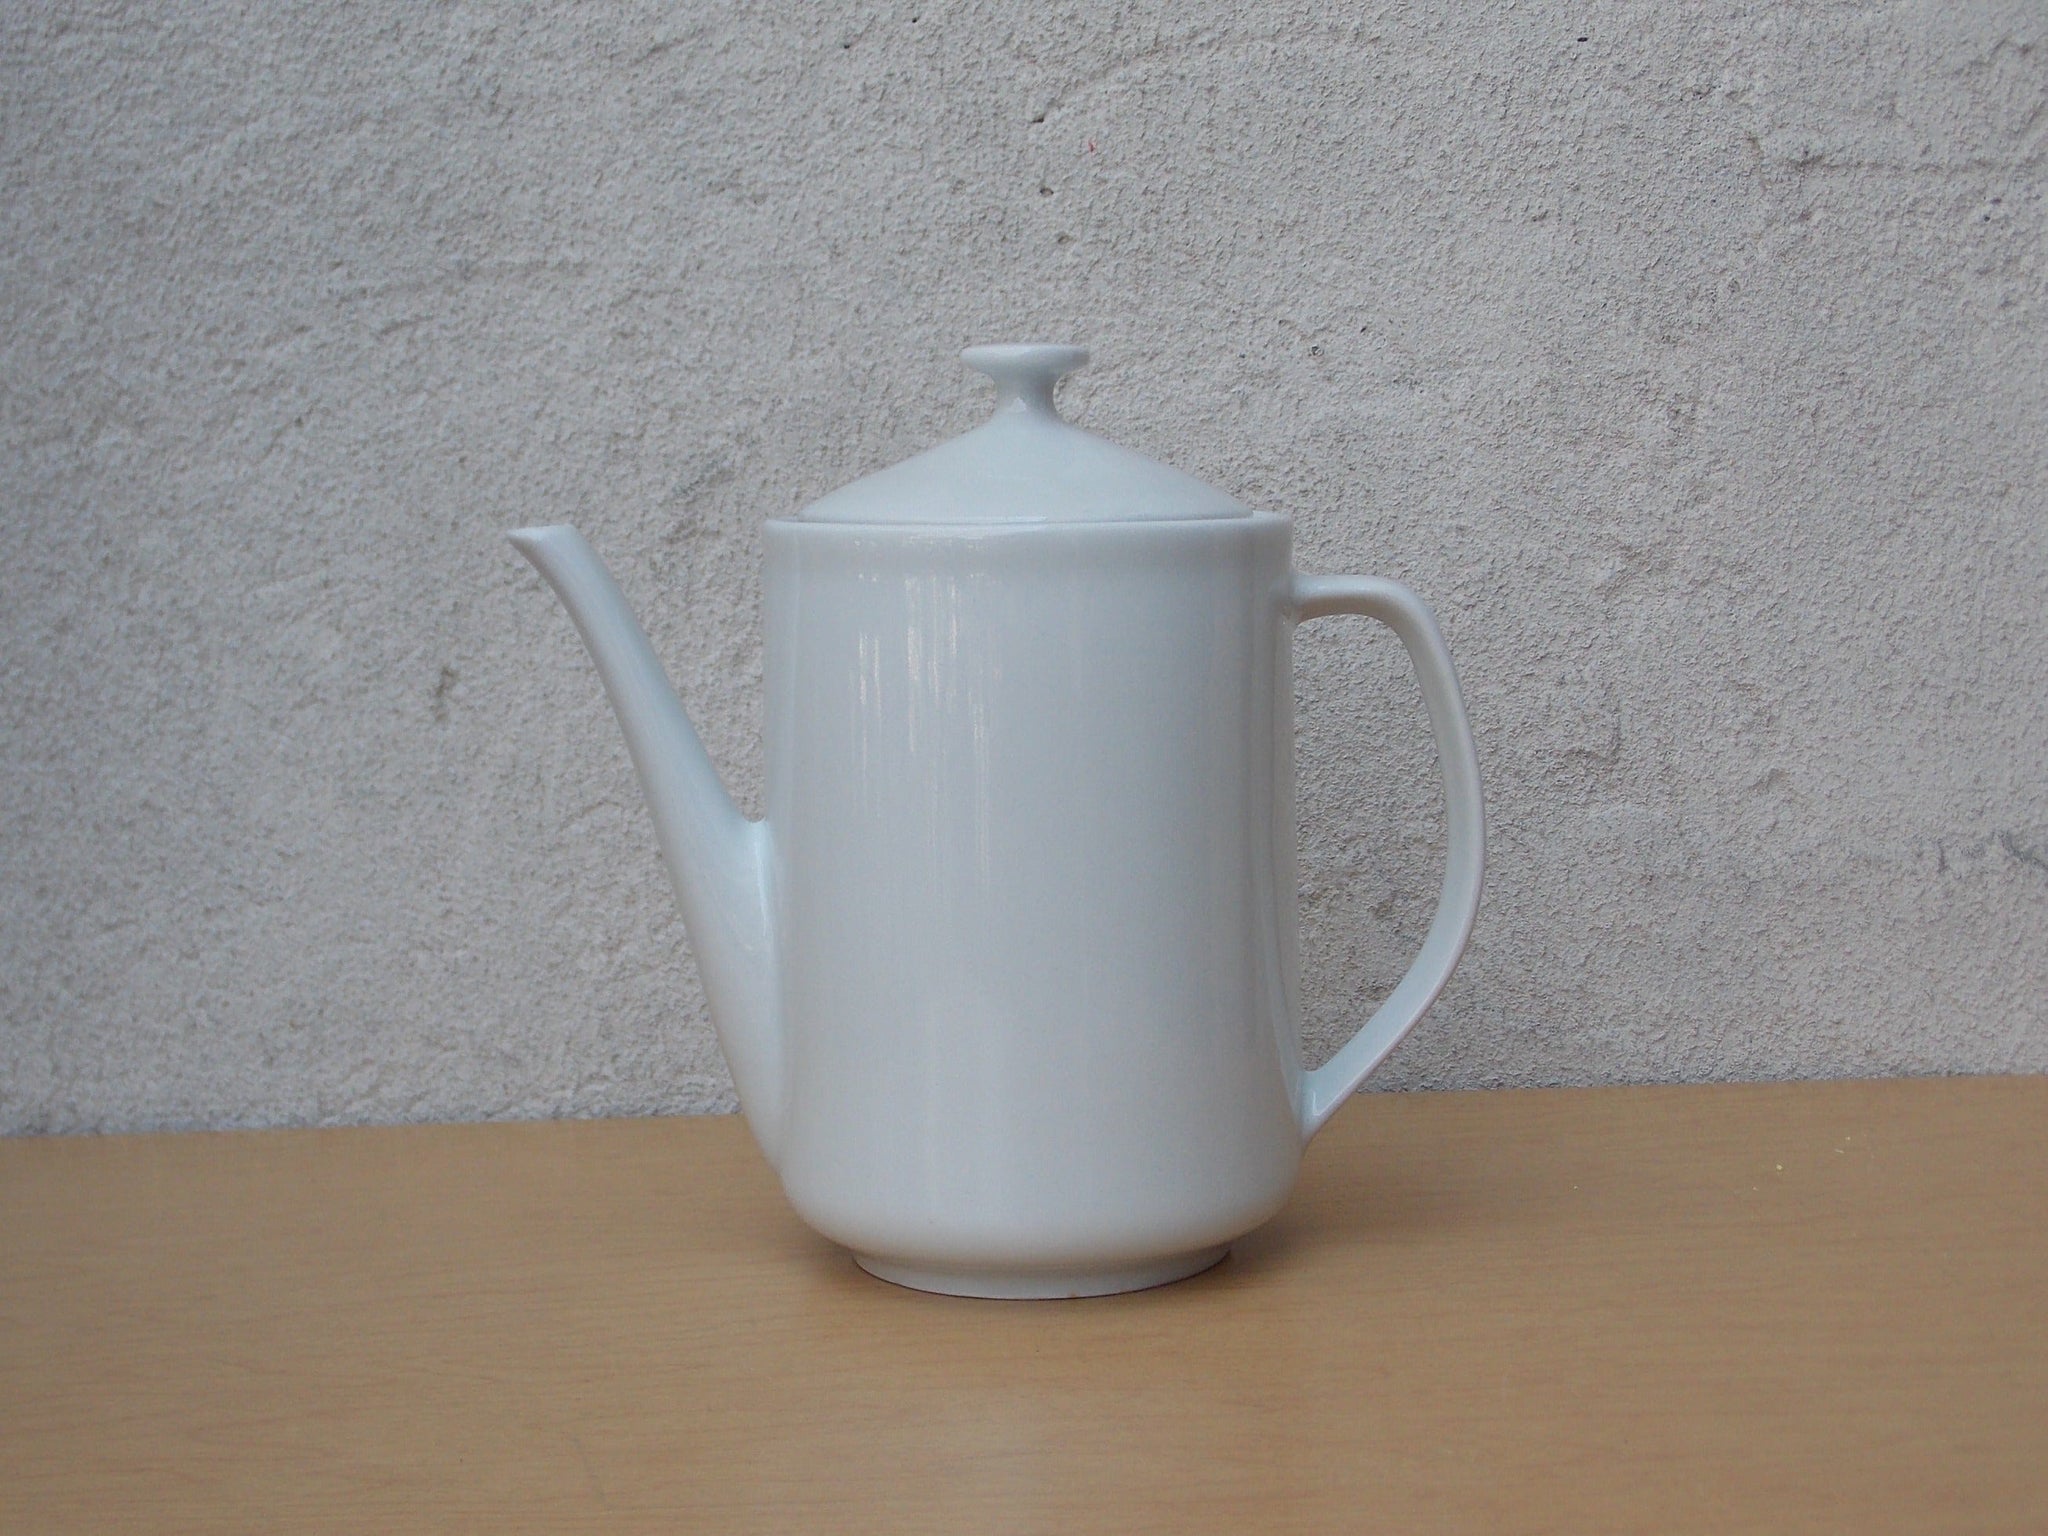 https://www.mikesmcm.com/cdn/shop/files/i-like-mike-s-mid-century-modern-accessories-simple-white-tall-modern-ceramic-teapot-or-coffee-pot-made-in-brazil-29069327761496_2048x.jpg?v=1690357162